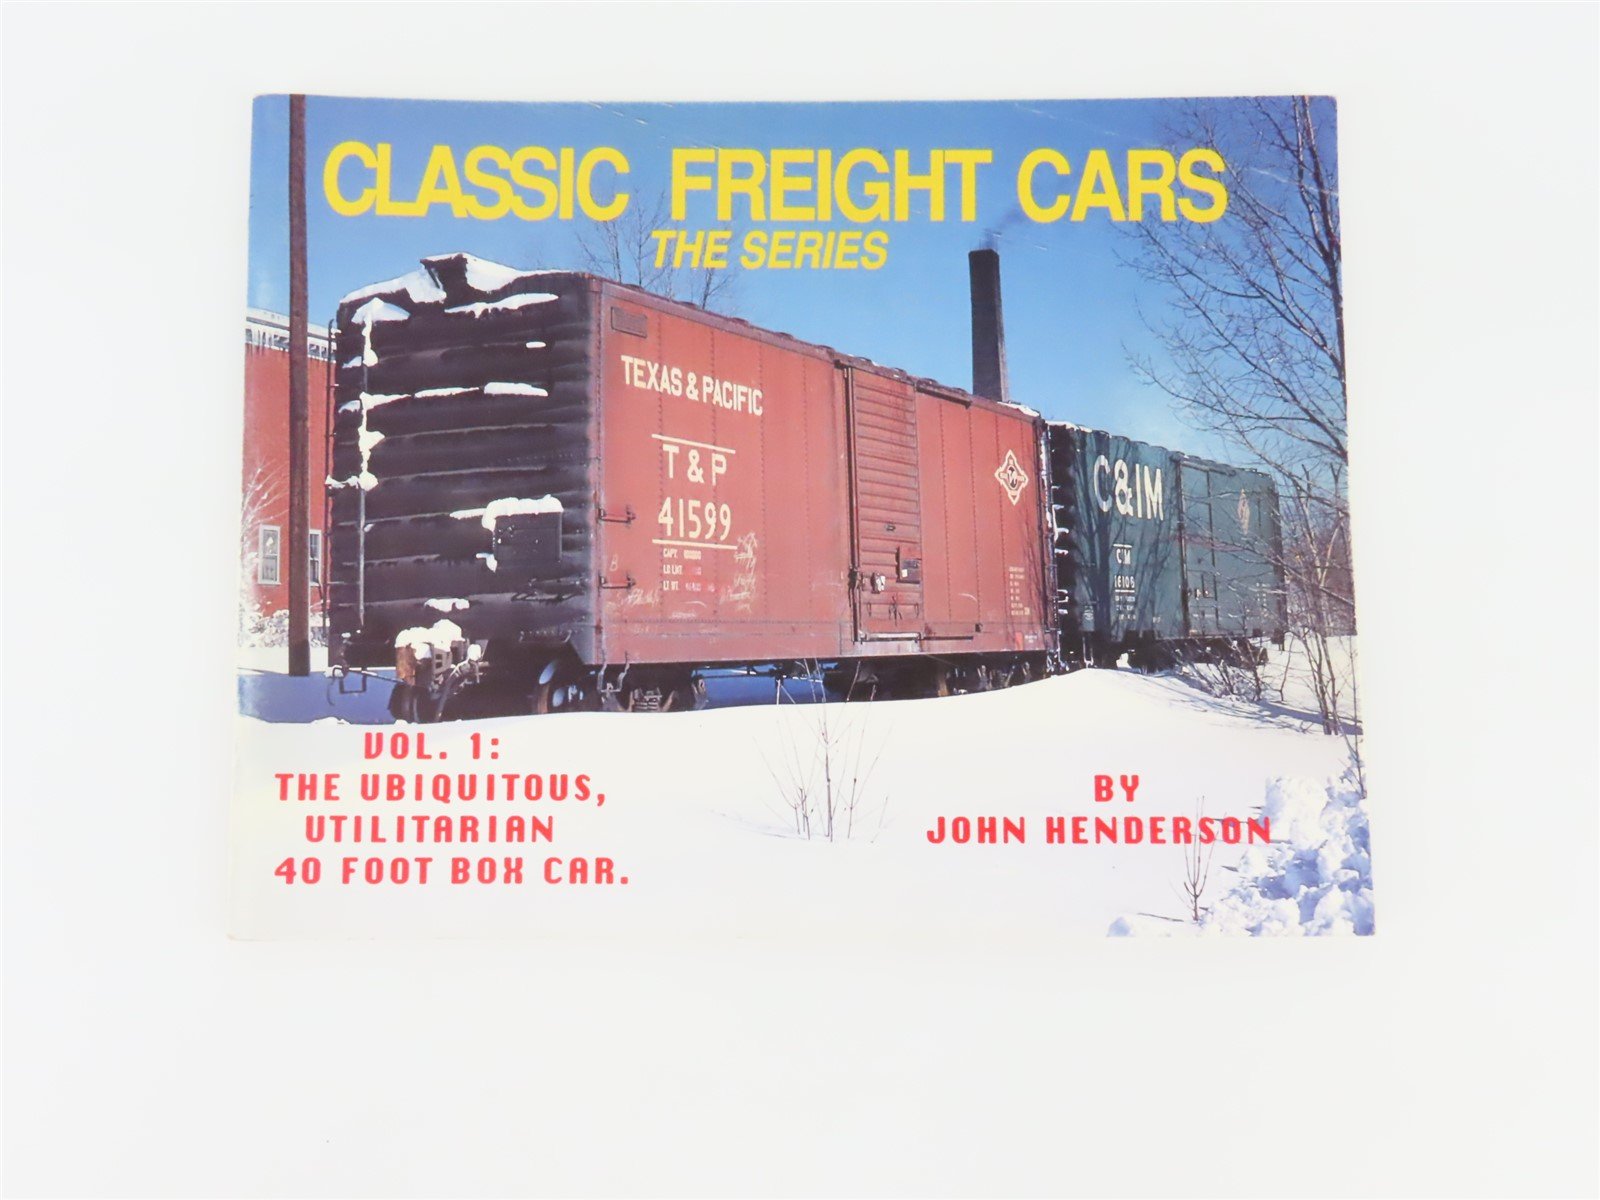 Classic Freight Cars -The Series- Volume 1 by John Henderson ©1992 SC Book